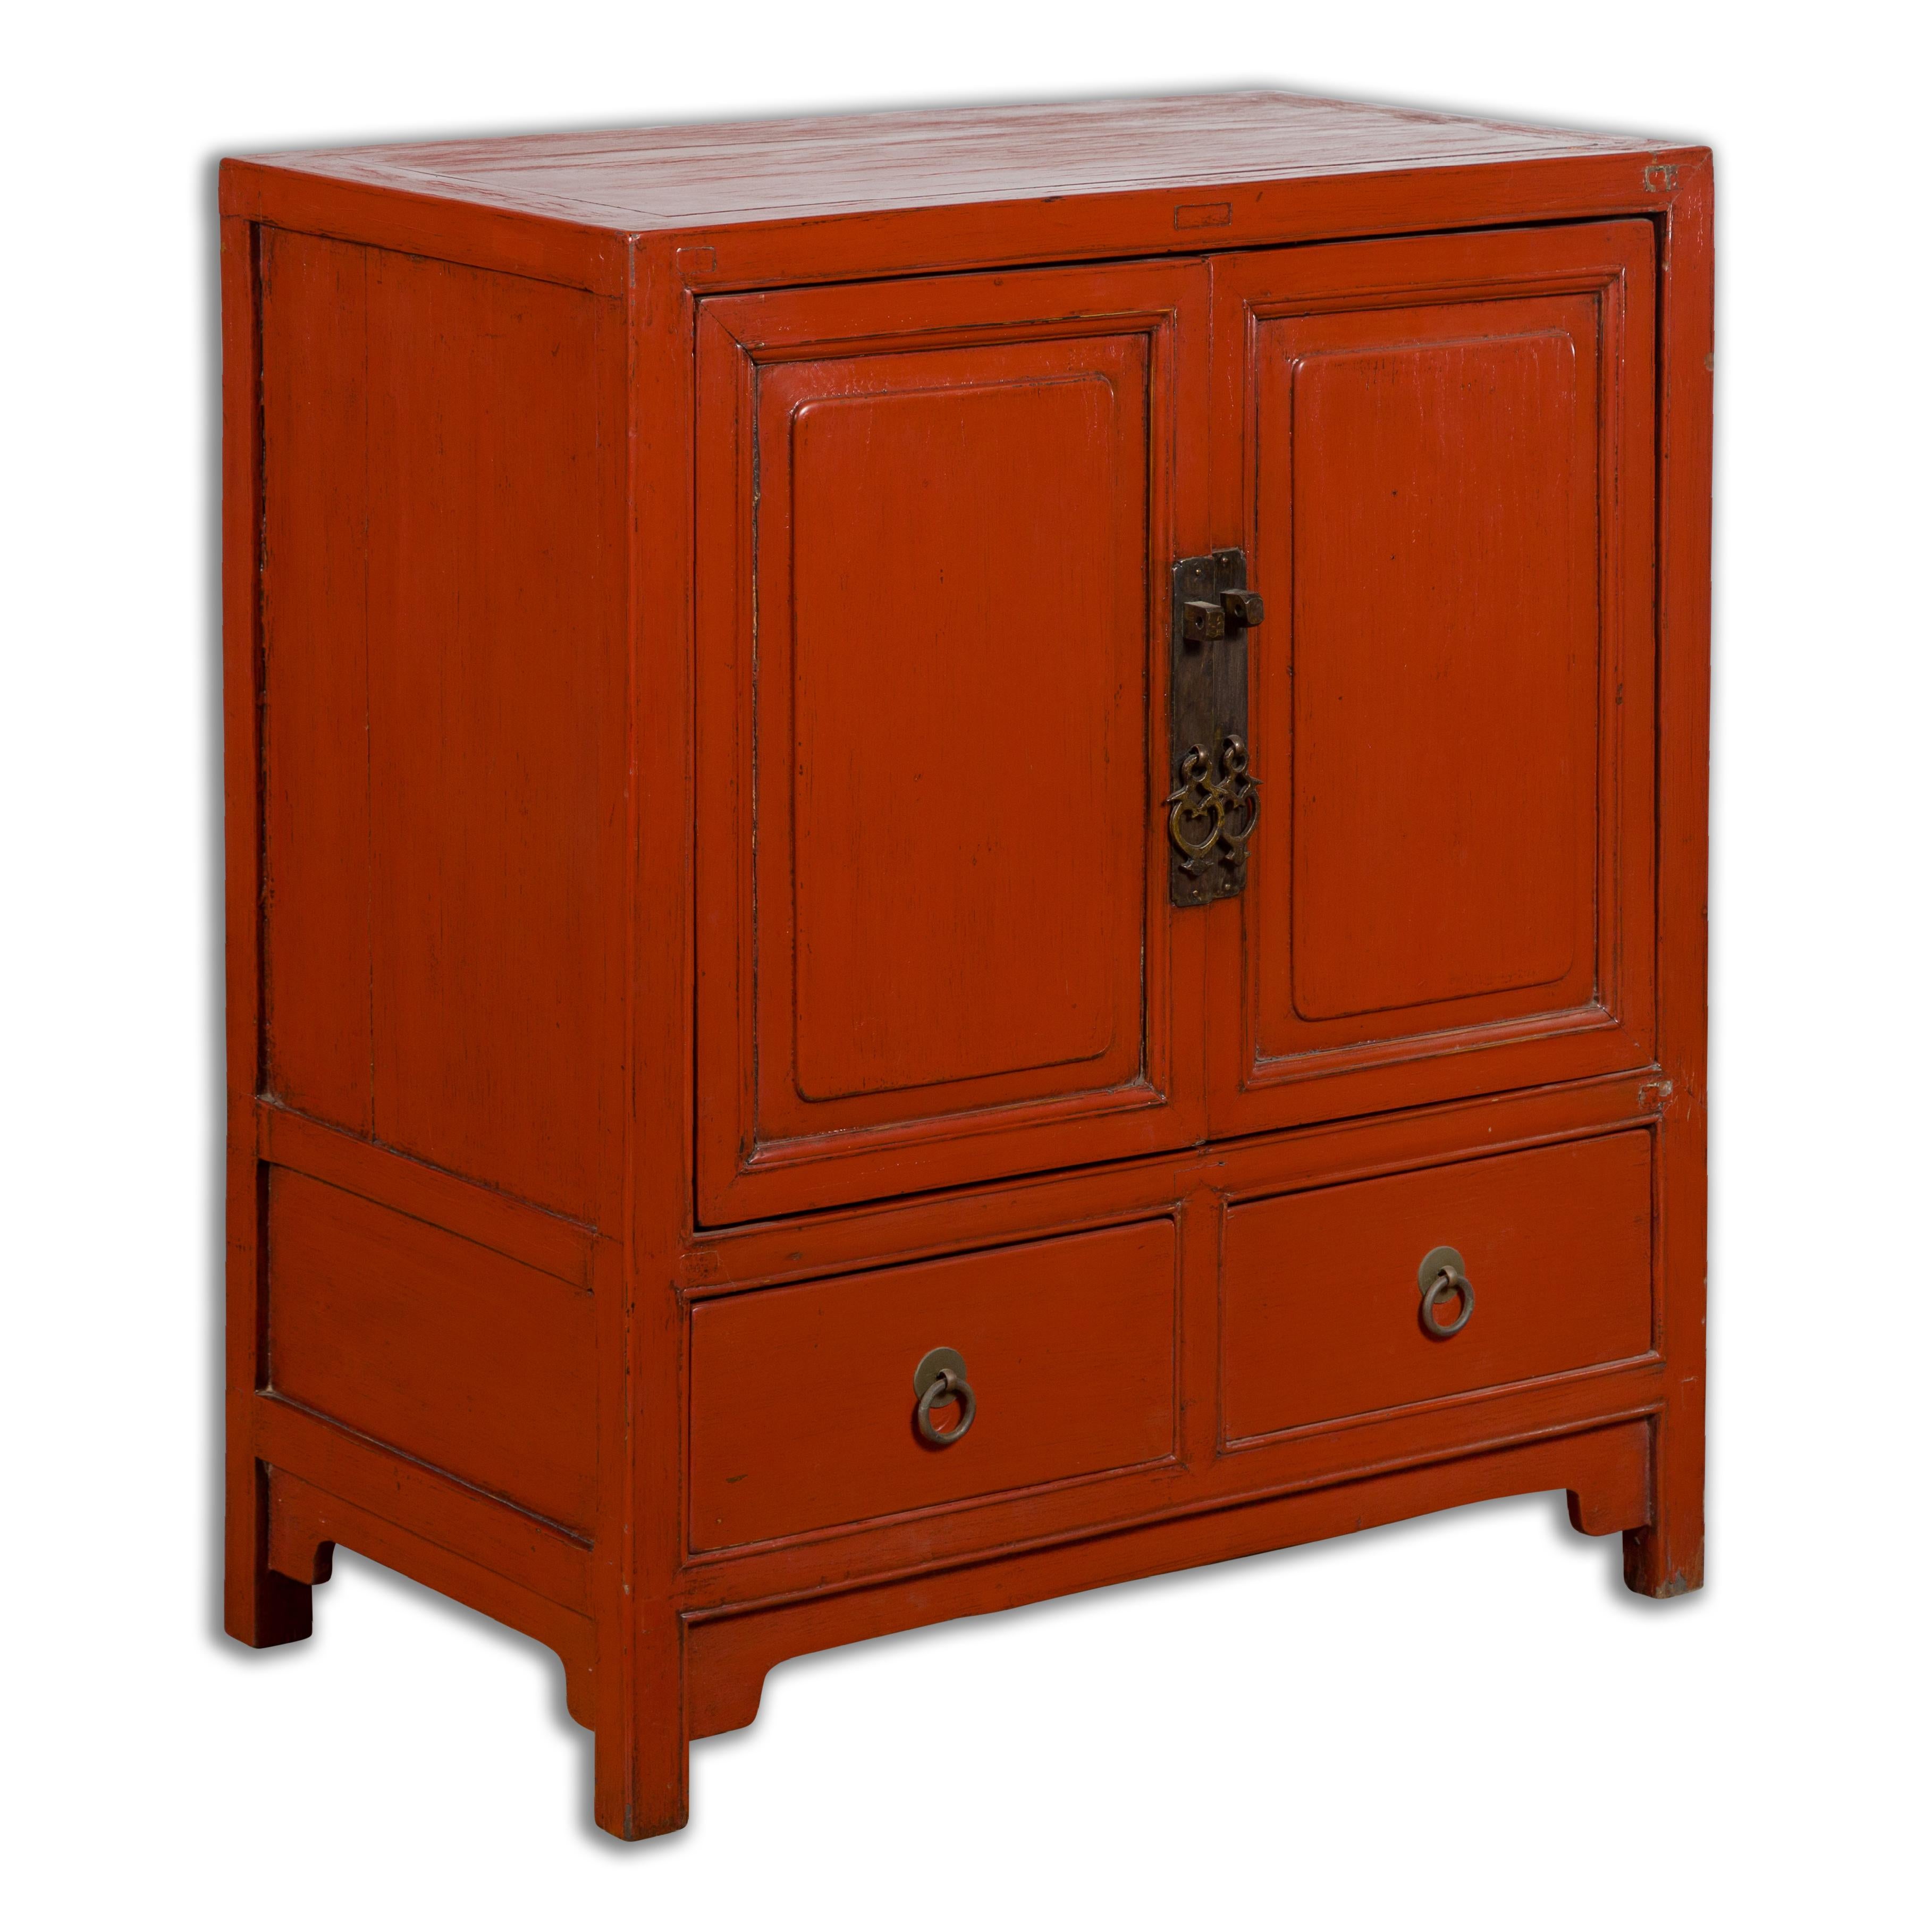 Chinese Qing Dynasty 19th Century Red Lacquer Cabinet with Doors and Drawers For Sale 10